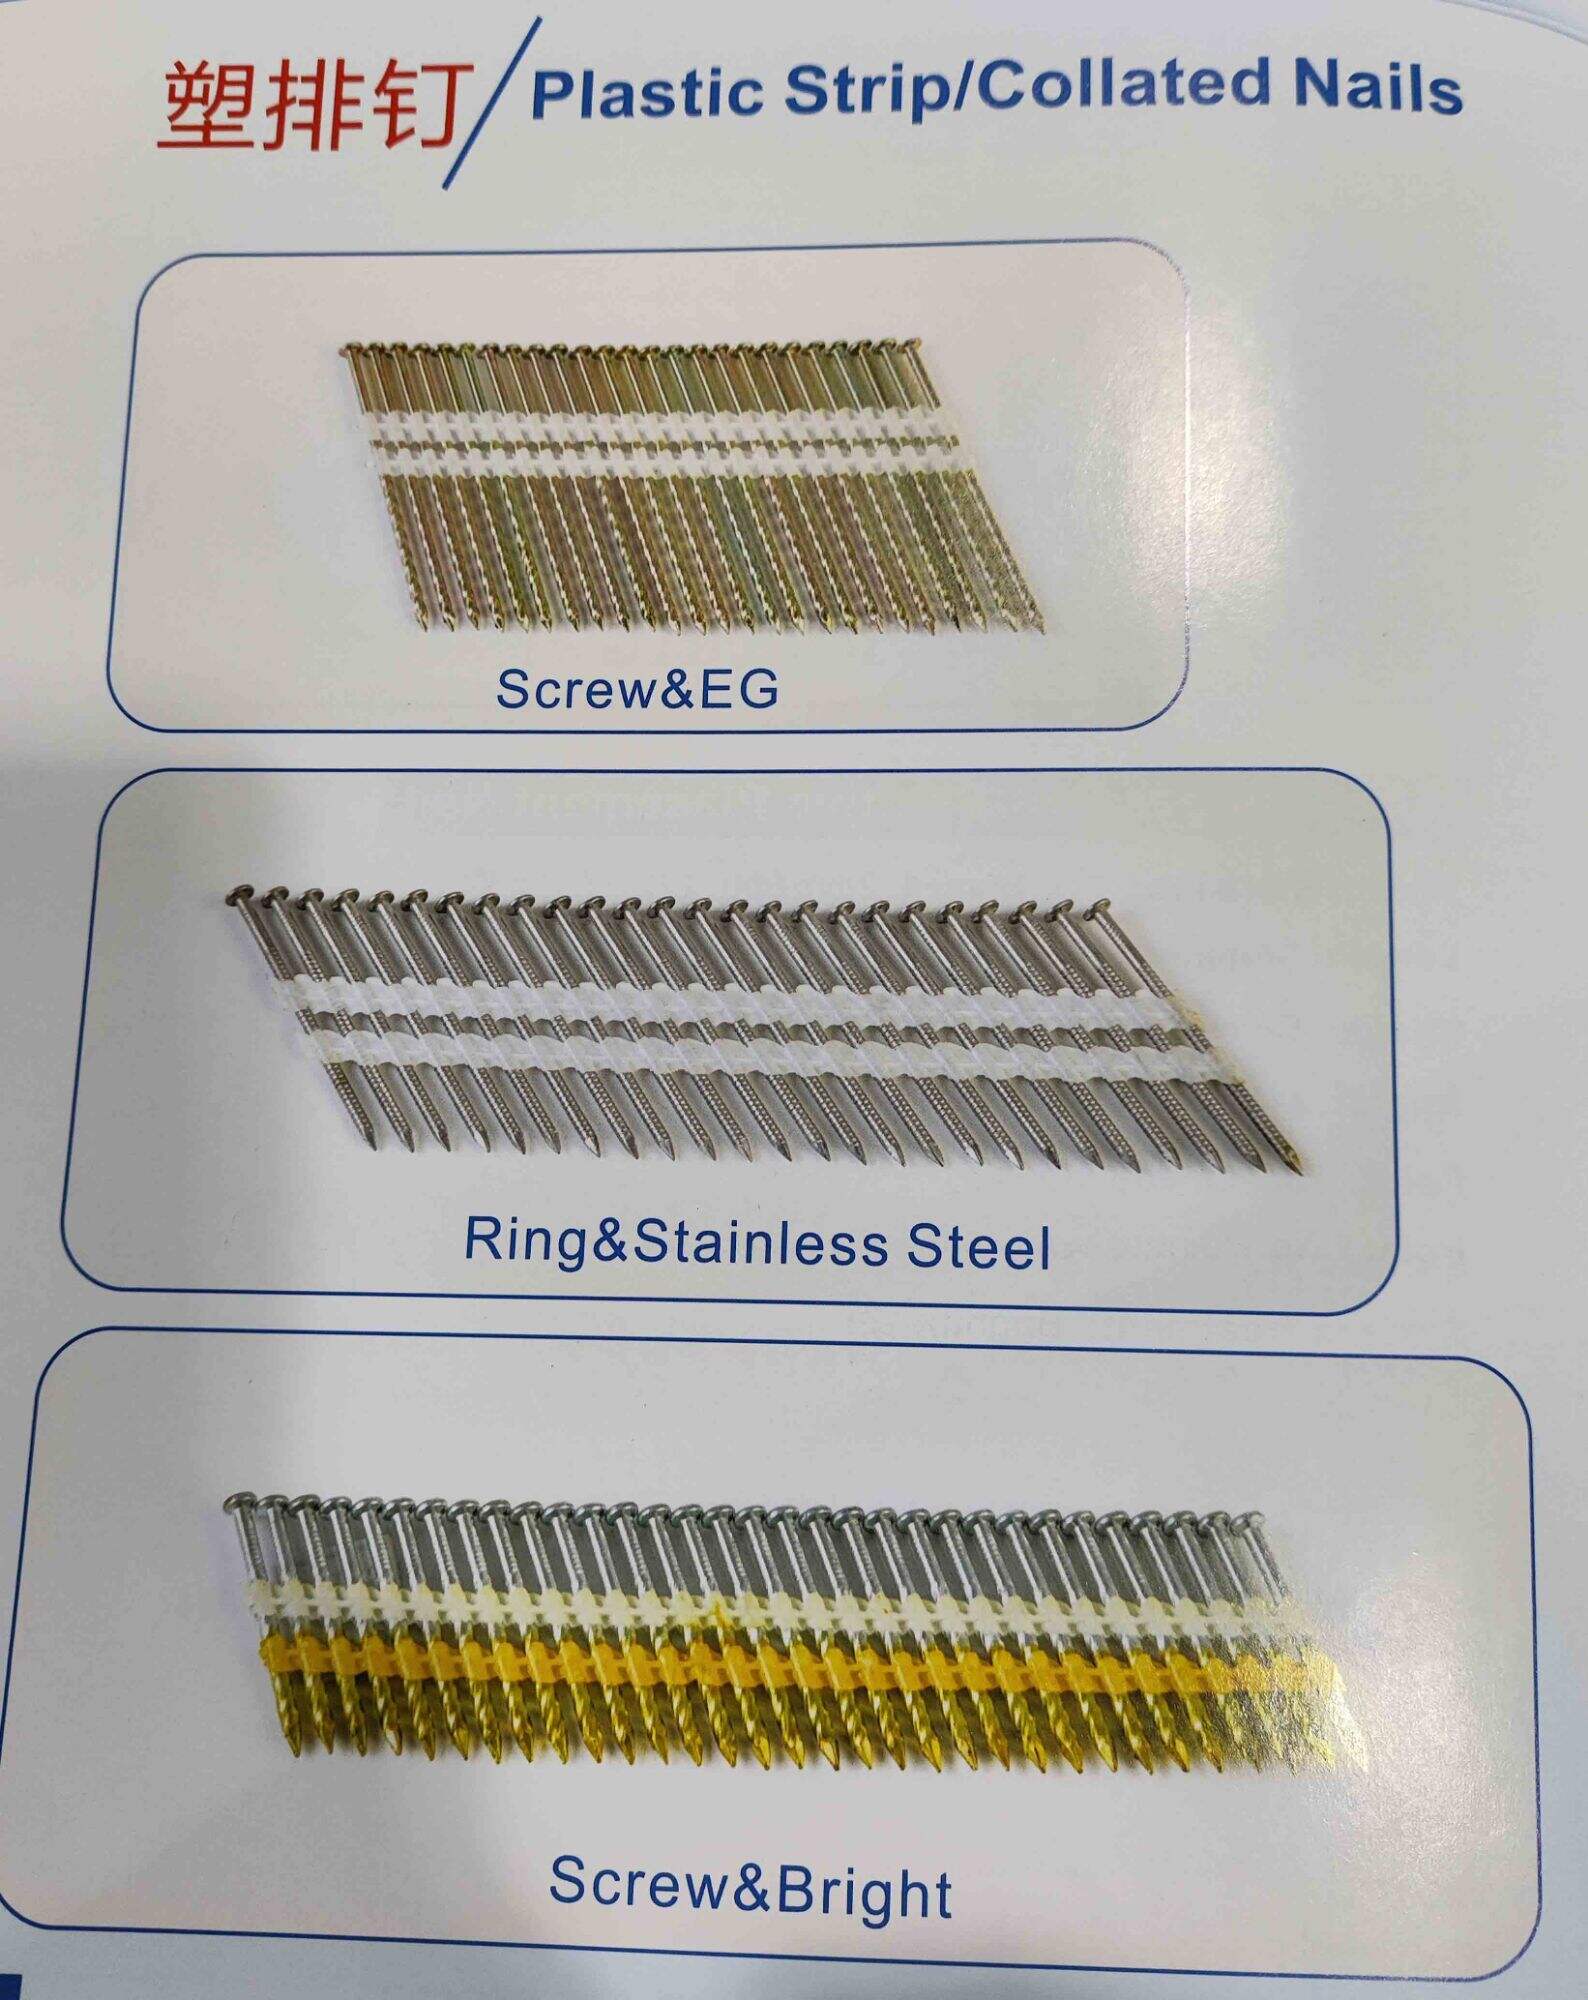 Plastic Strip/Collated Nails Packing Specifications And Production Delivery Time